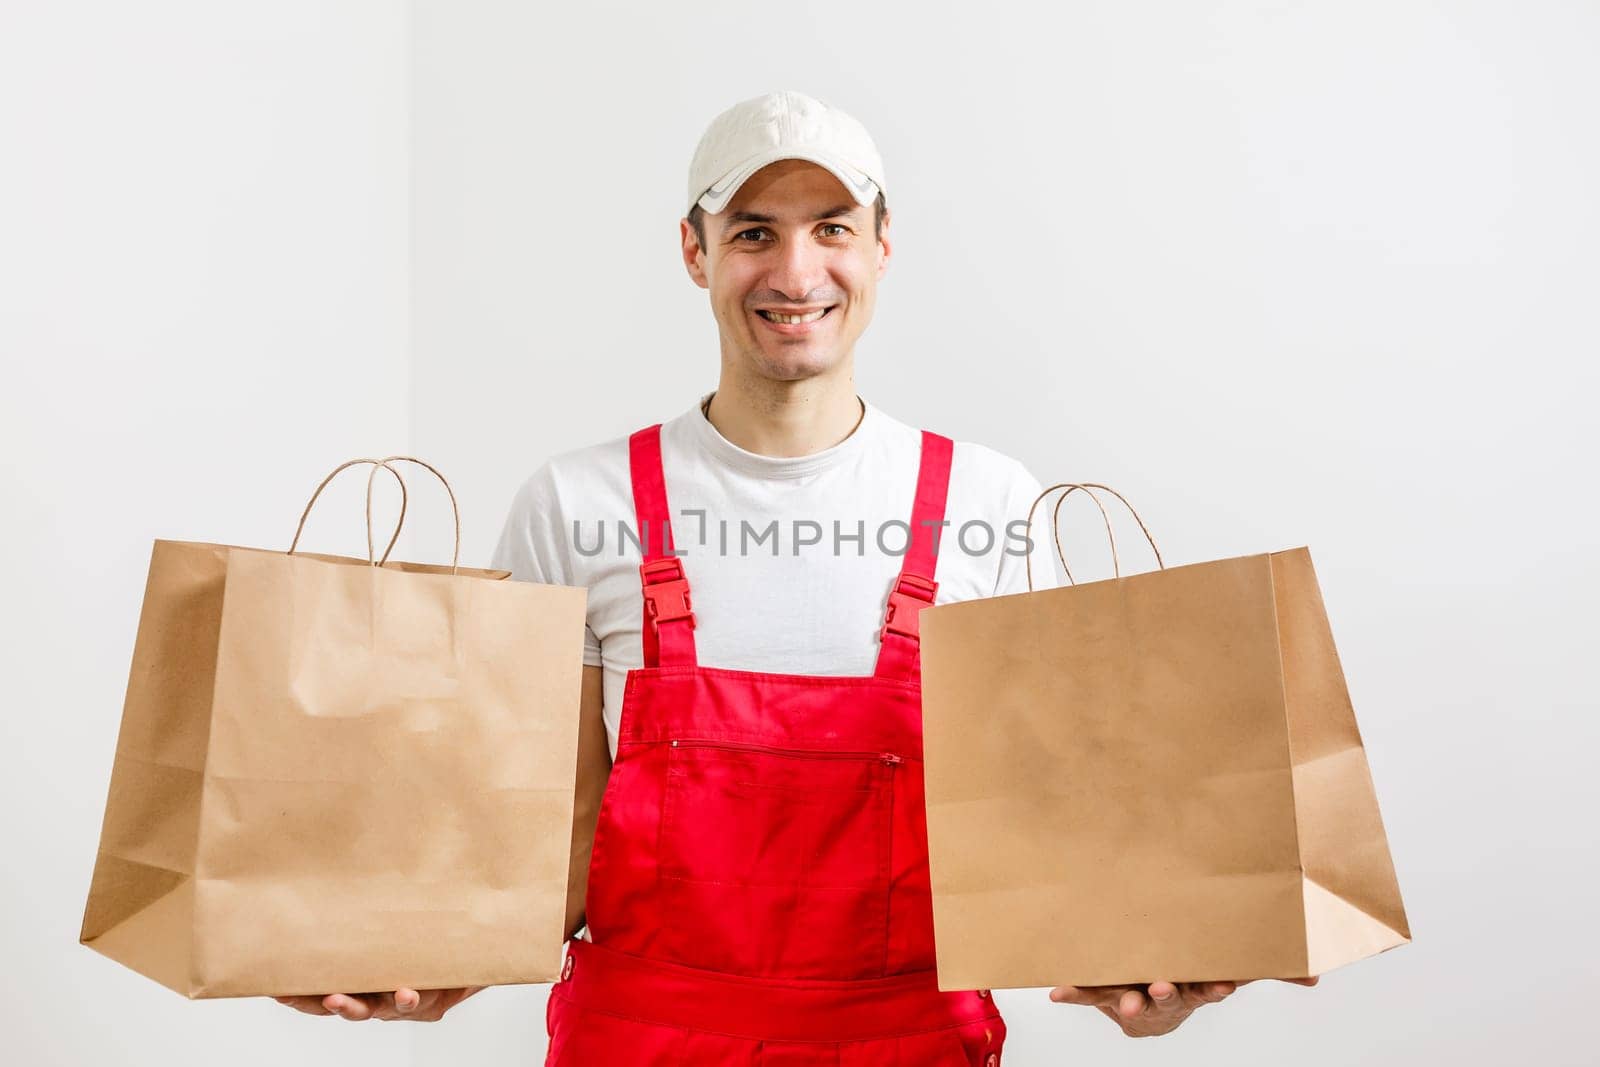 paper containers for takeaway food. Delivery man is carrying by Andelov13